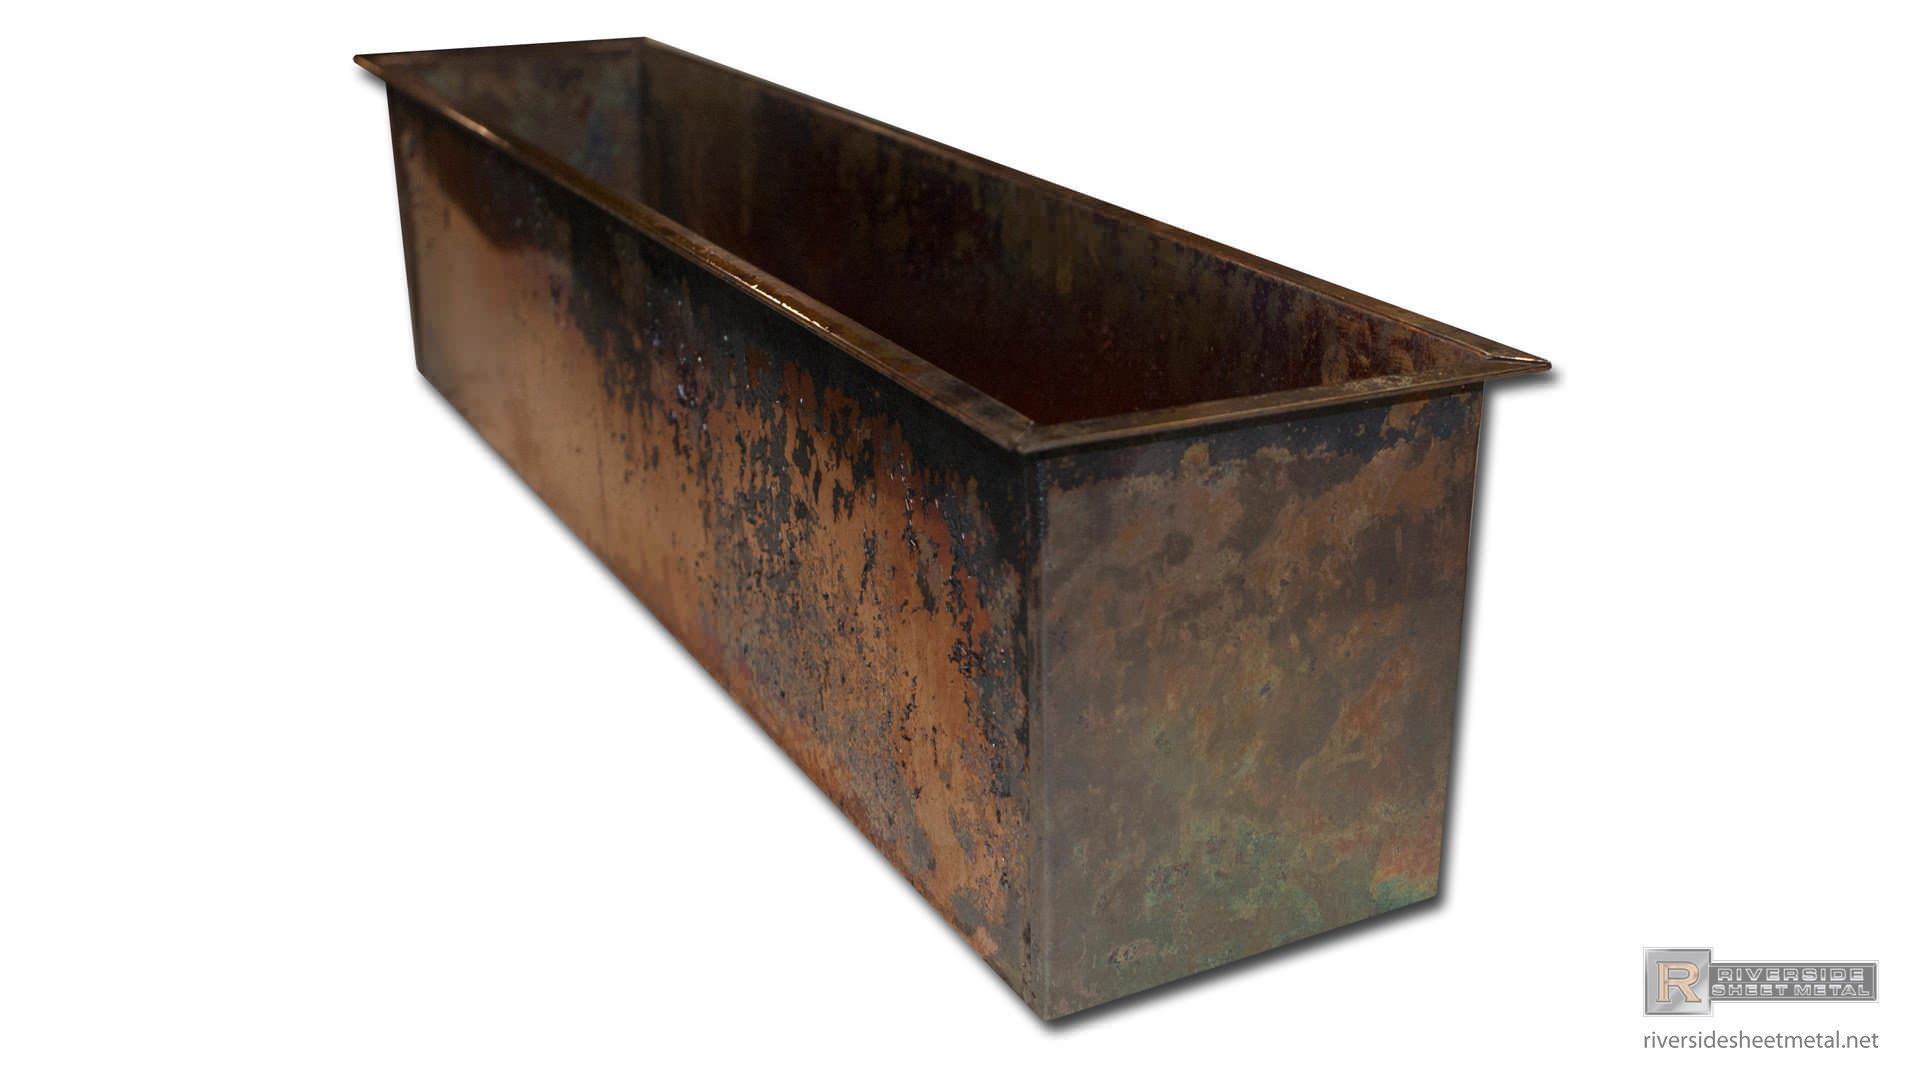 12 x 120 Solid Copper Sheet Metal fabrication arts and crafts metal working weather gains plant box gardening